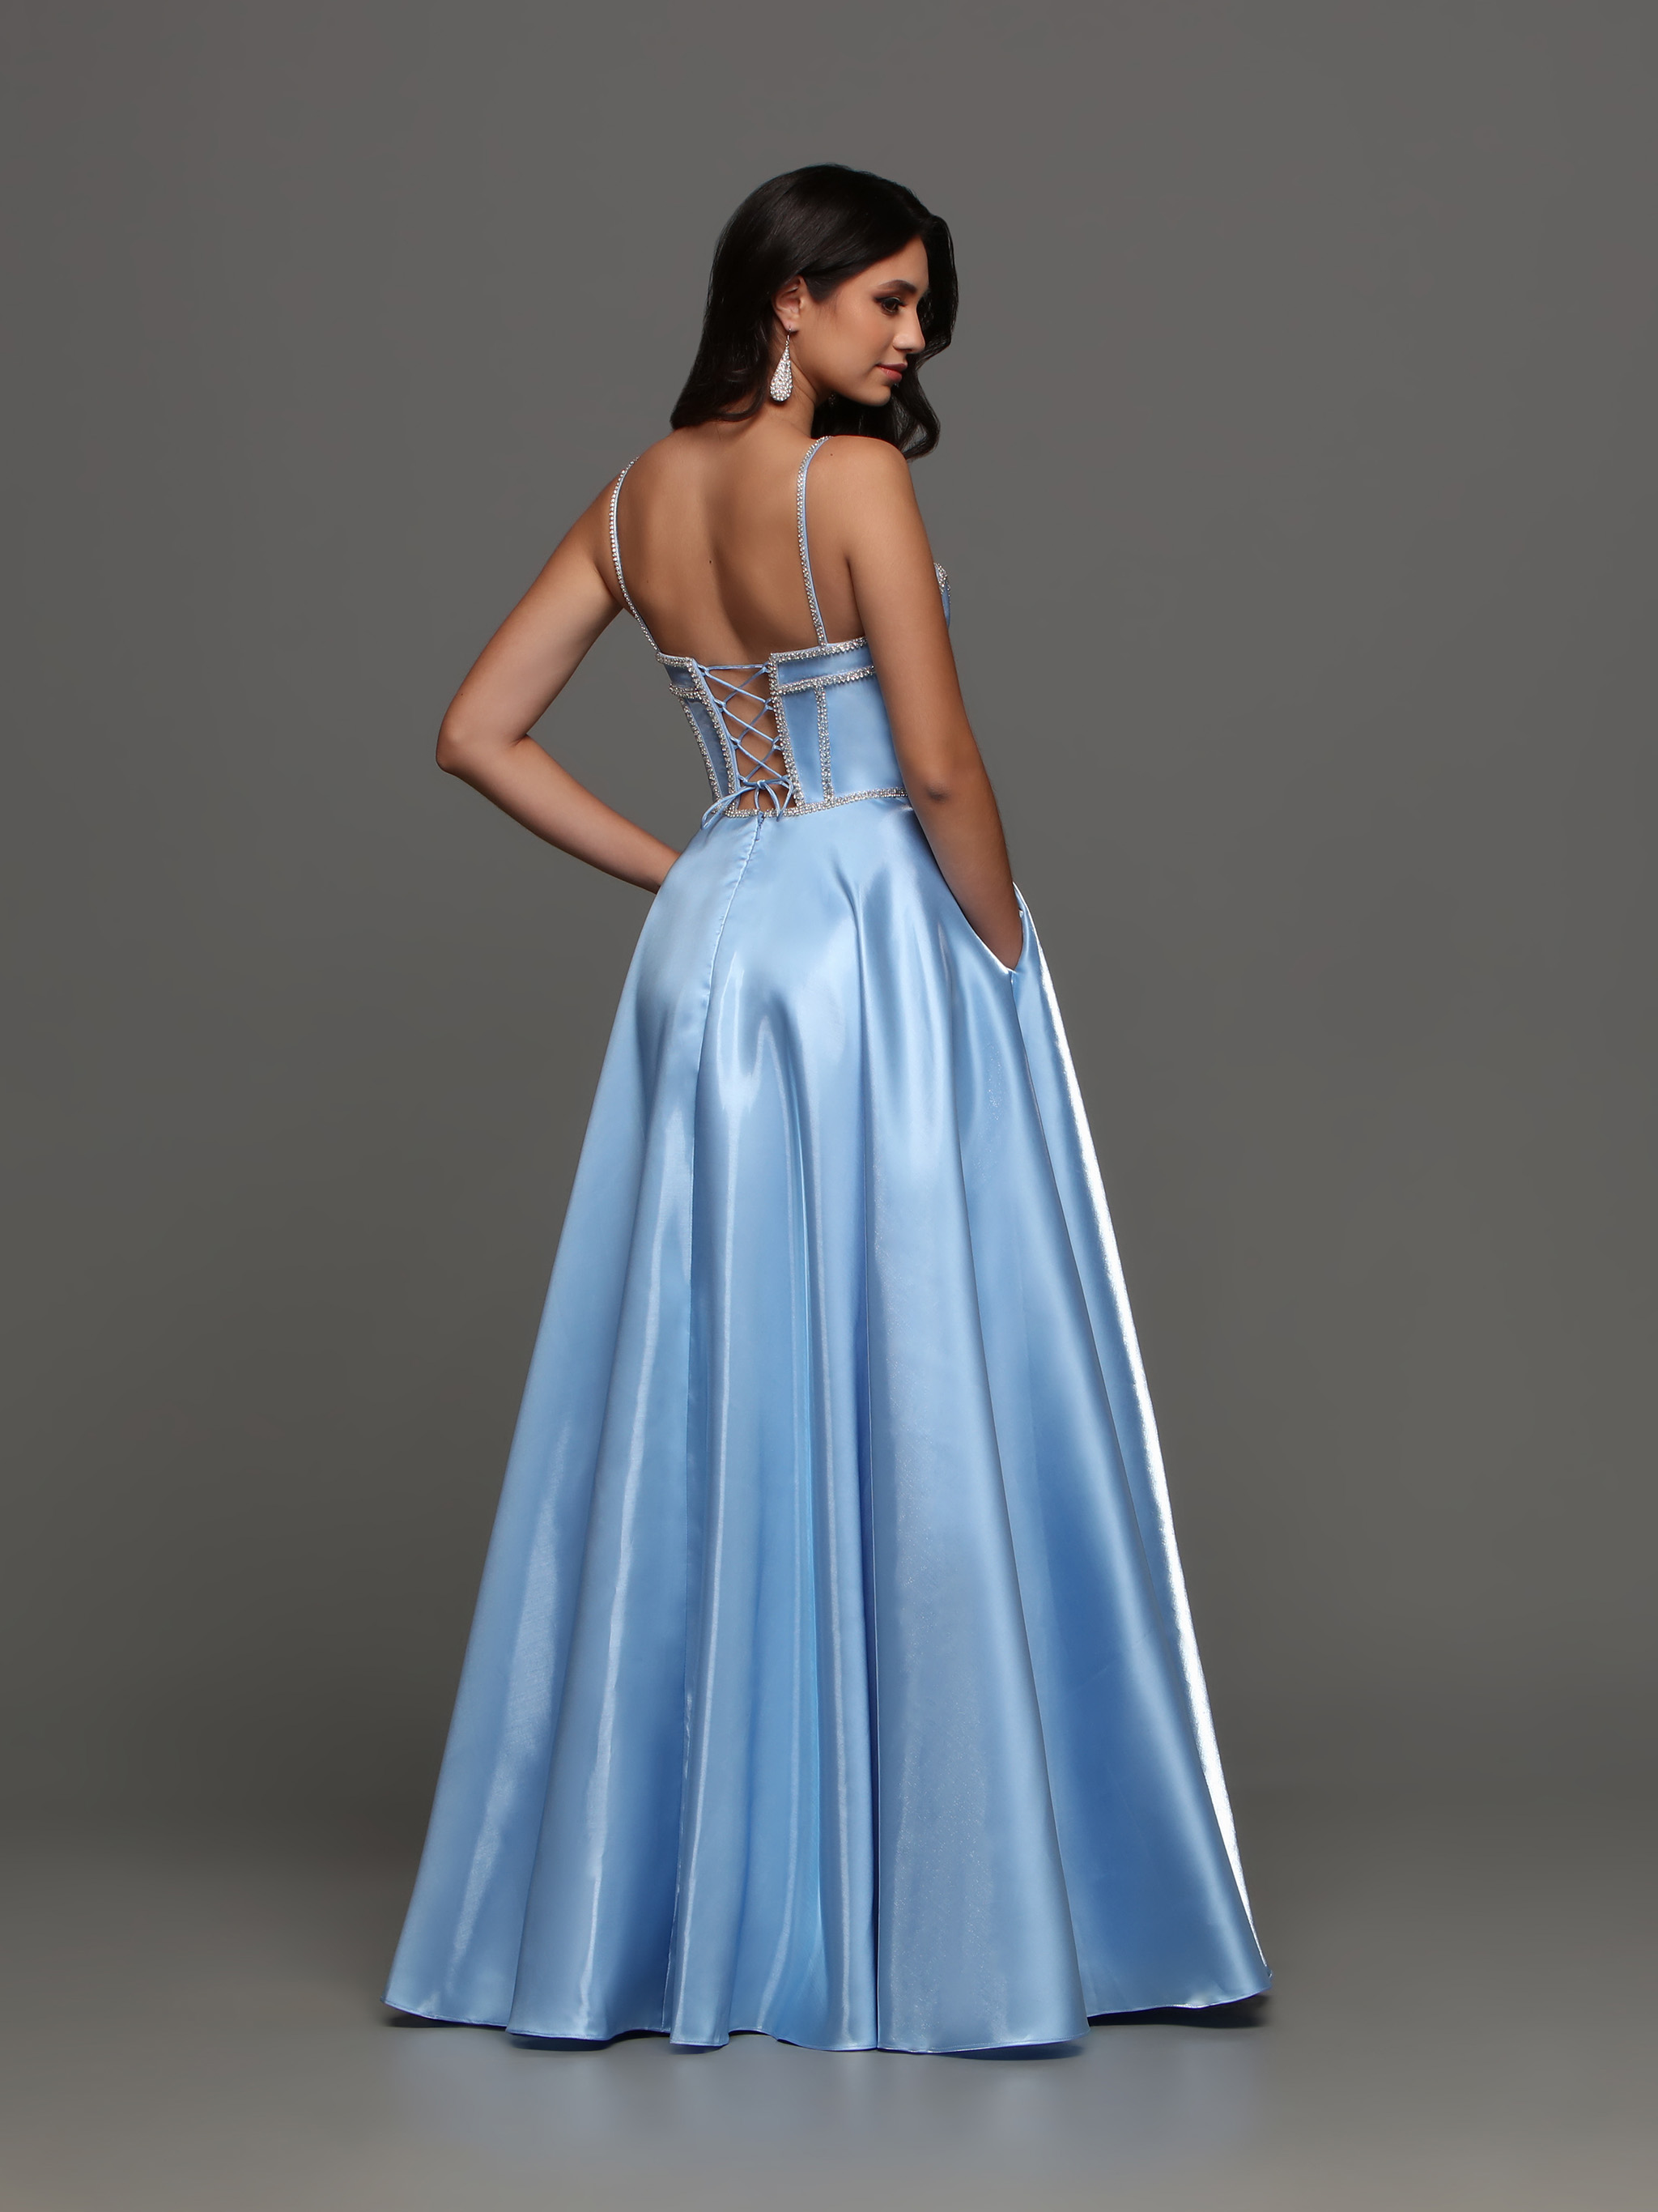 Image showing back view of style #72398